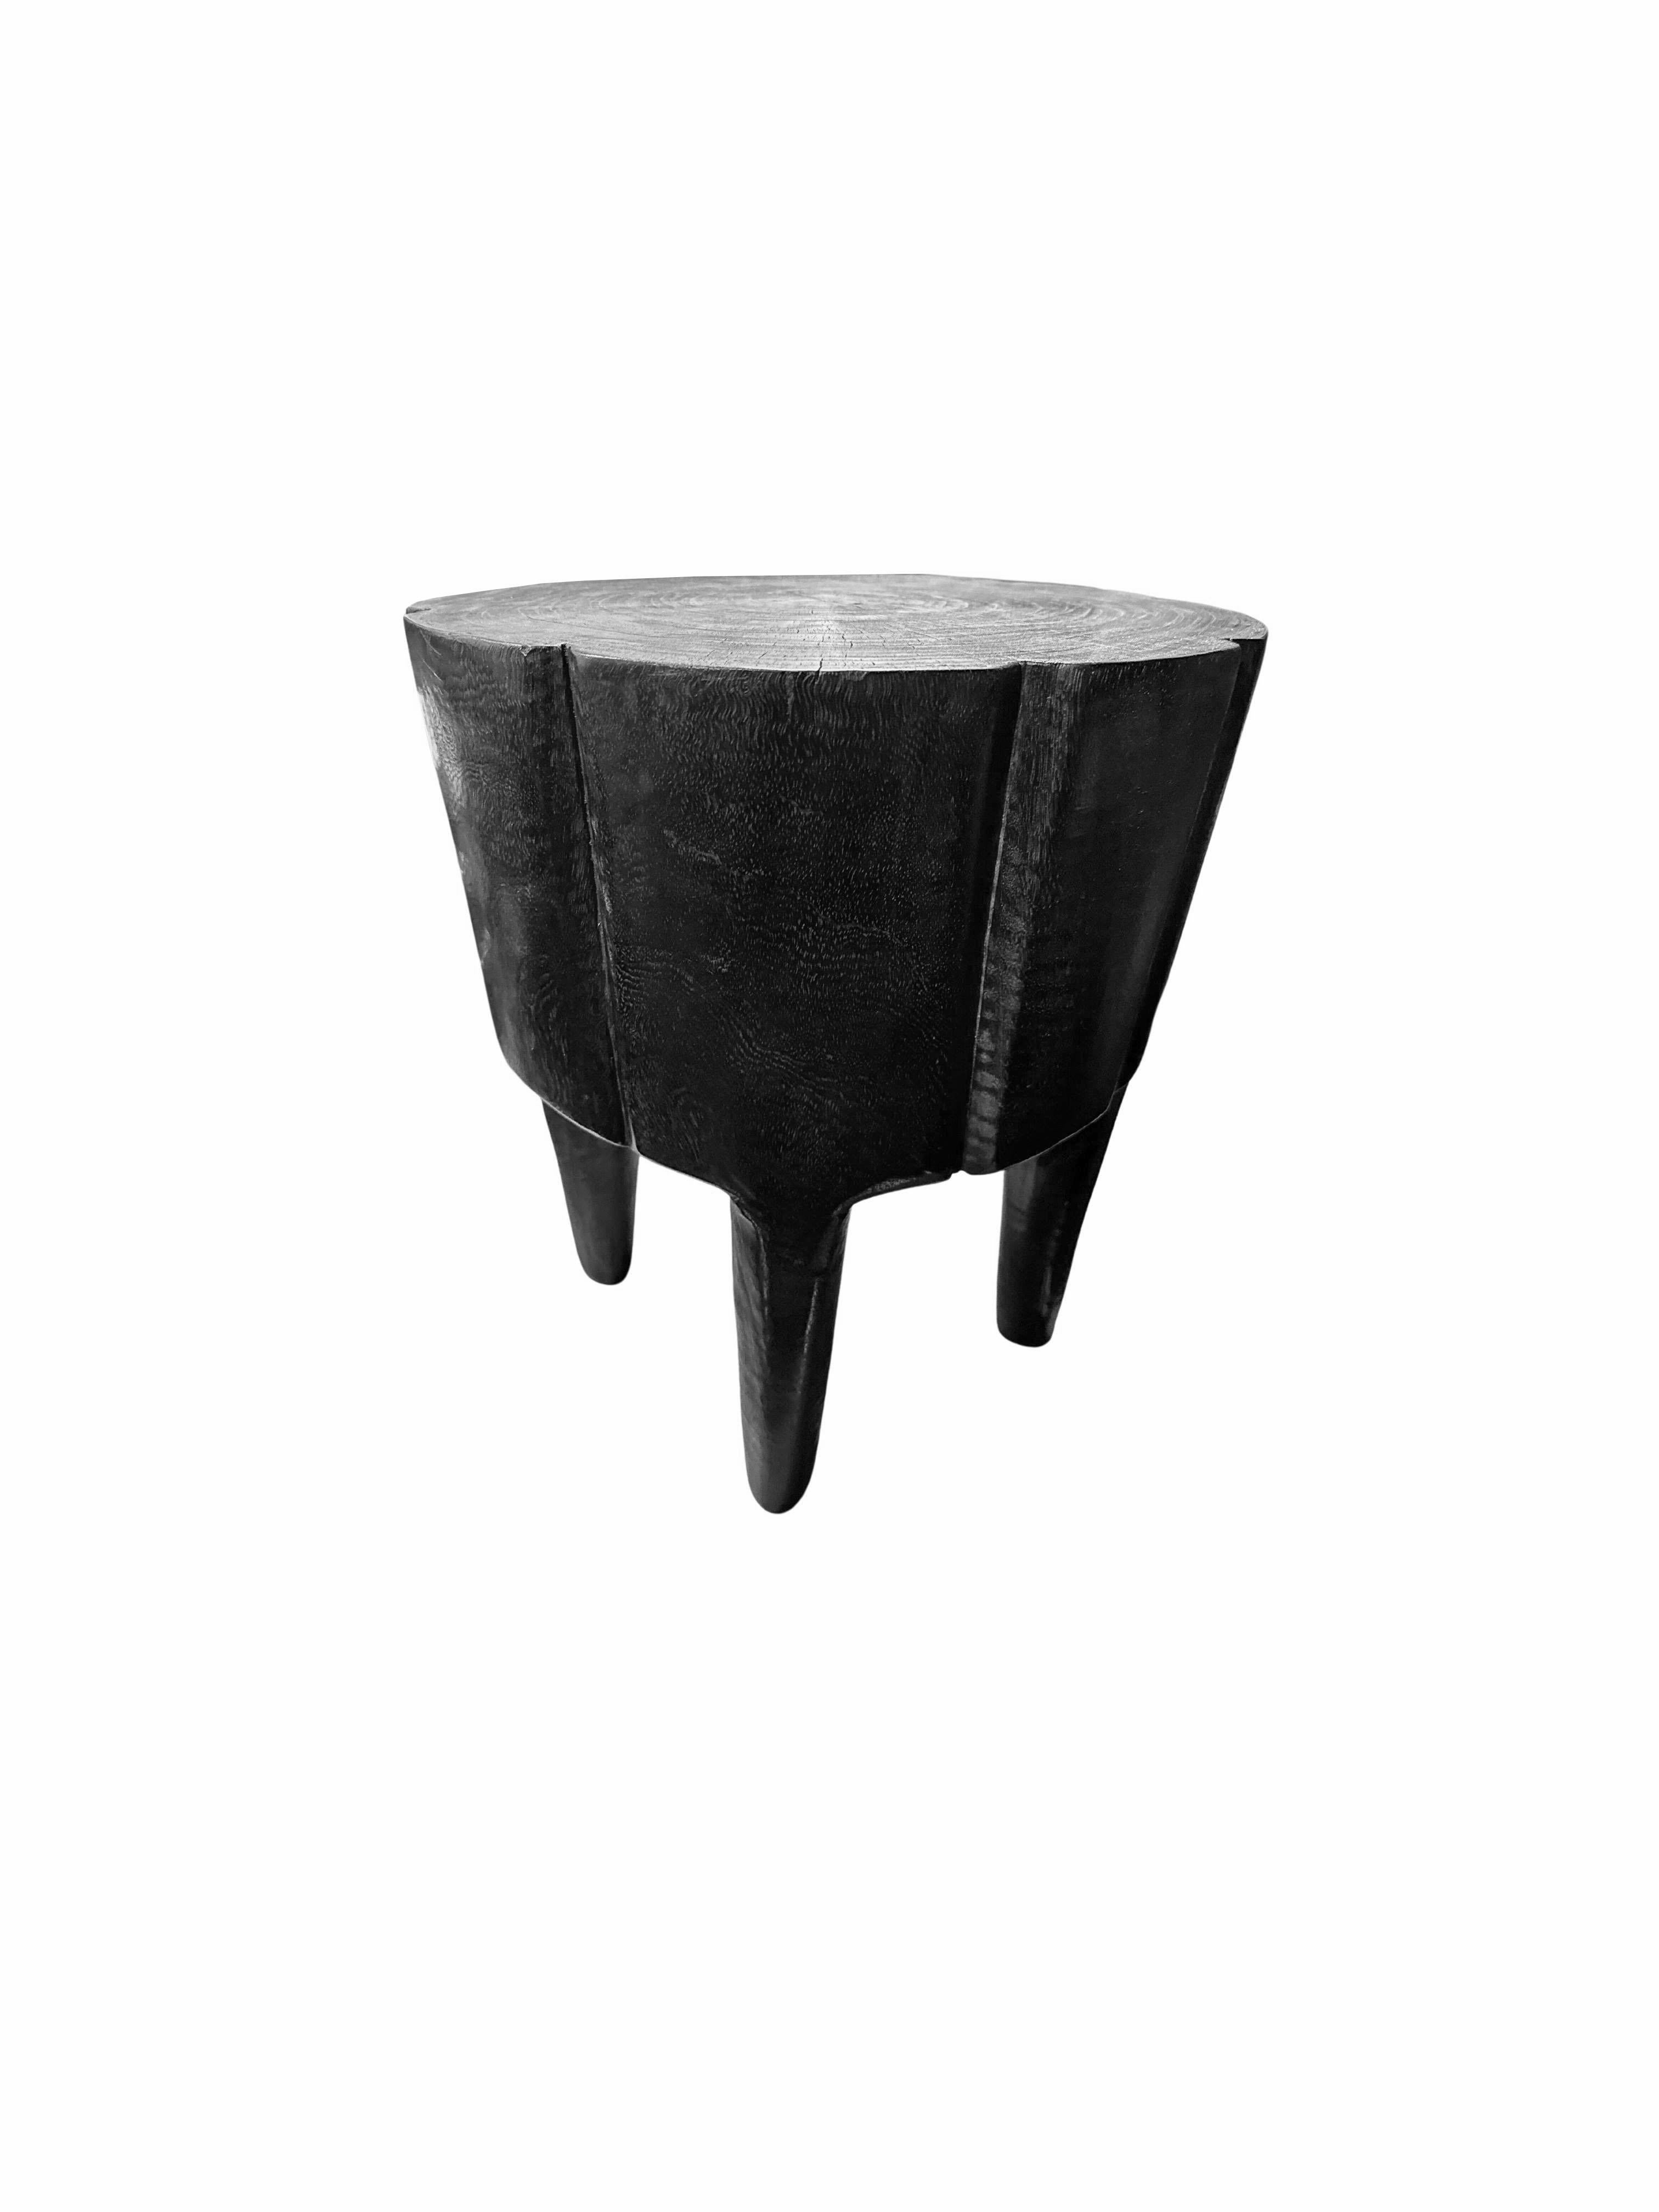 A wonderfully sculptural round side table. Its neutral pigments make it perfect for any space. It was crafted from a solid block of mango wood and features subtle carved detailing on its side as well as slender legs. To achieve its black color the